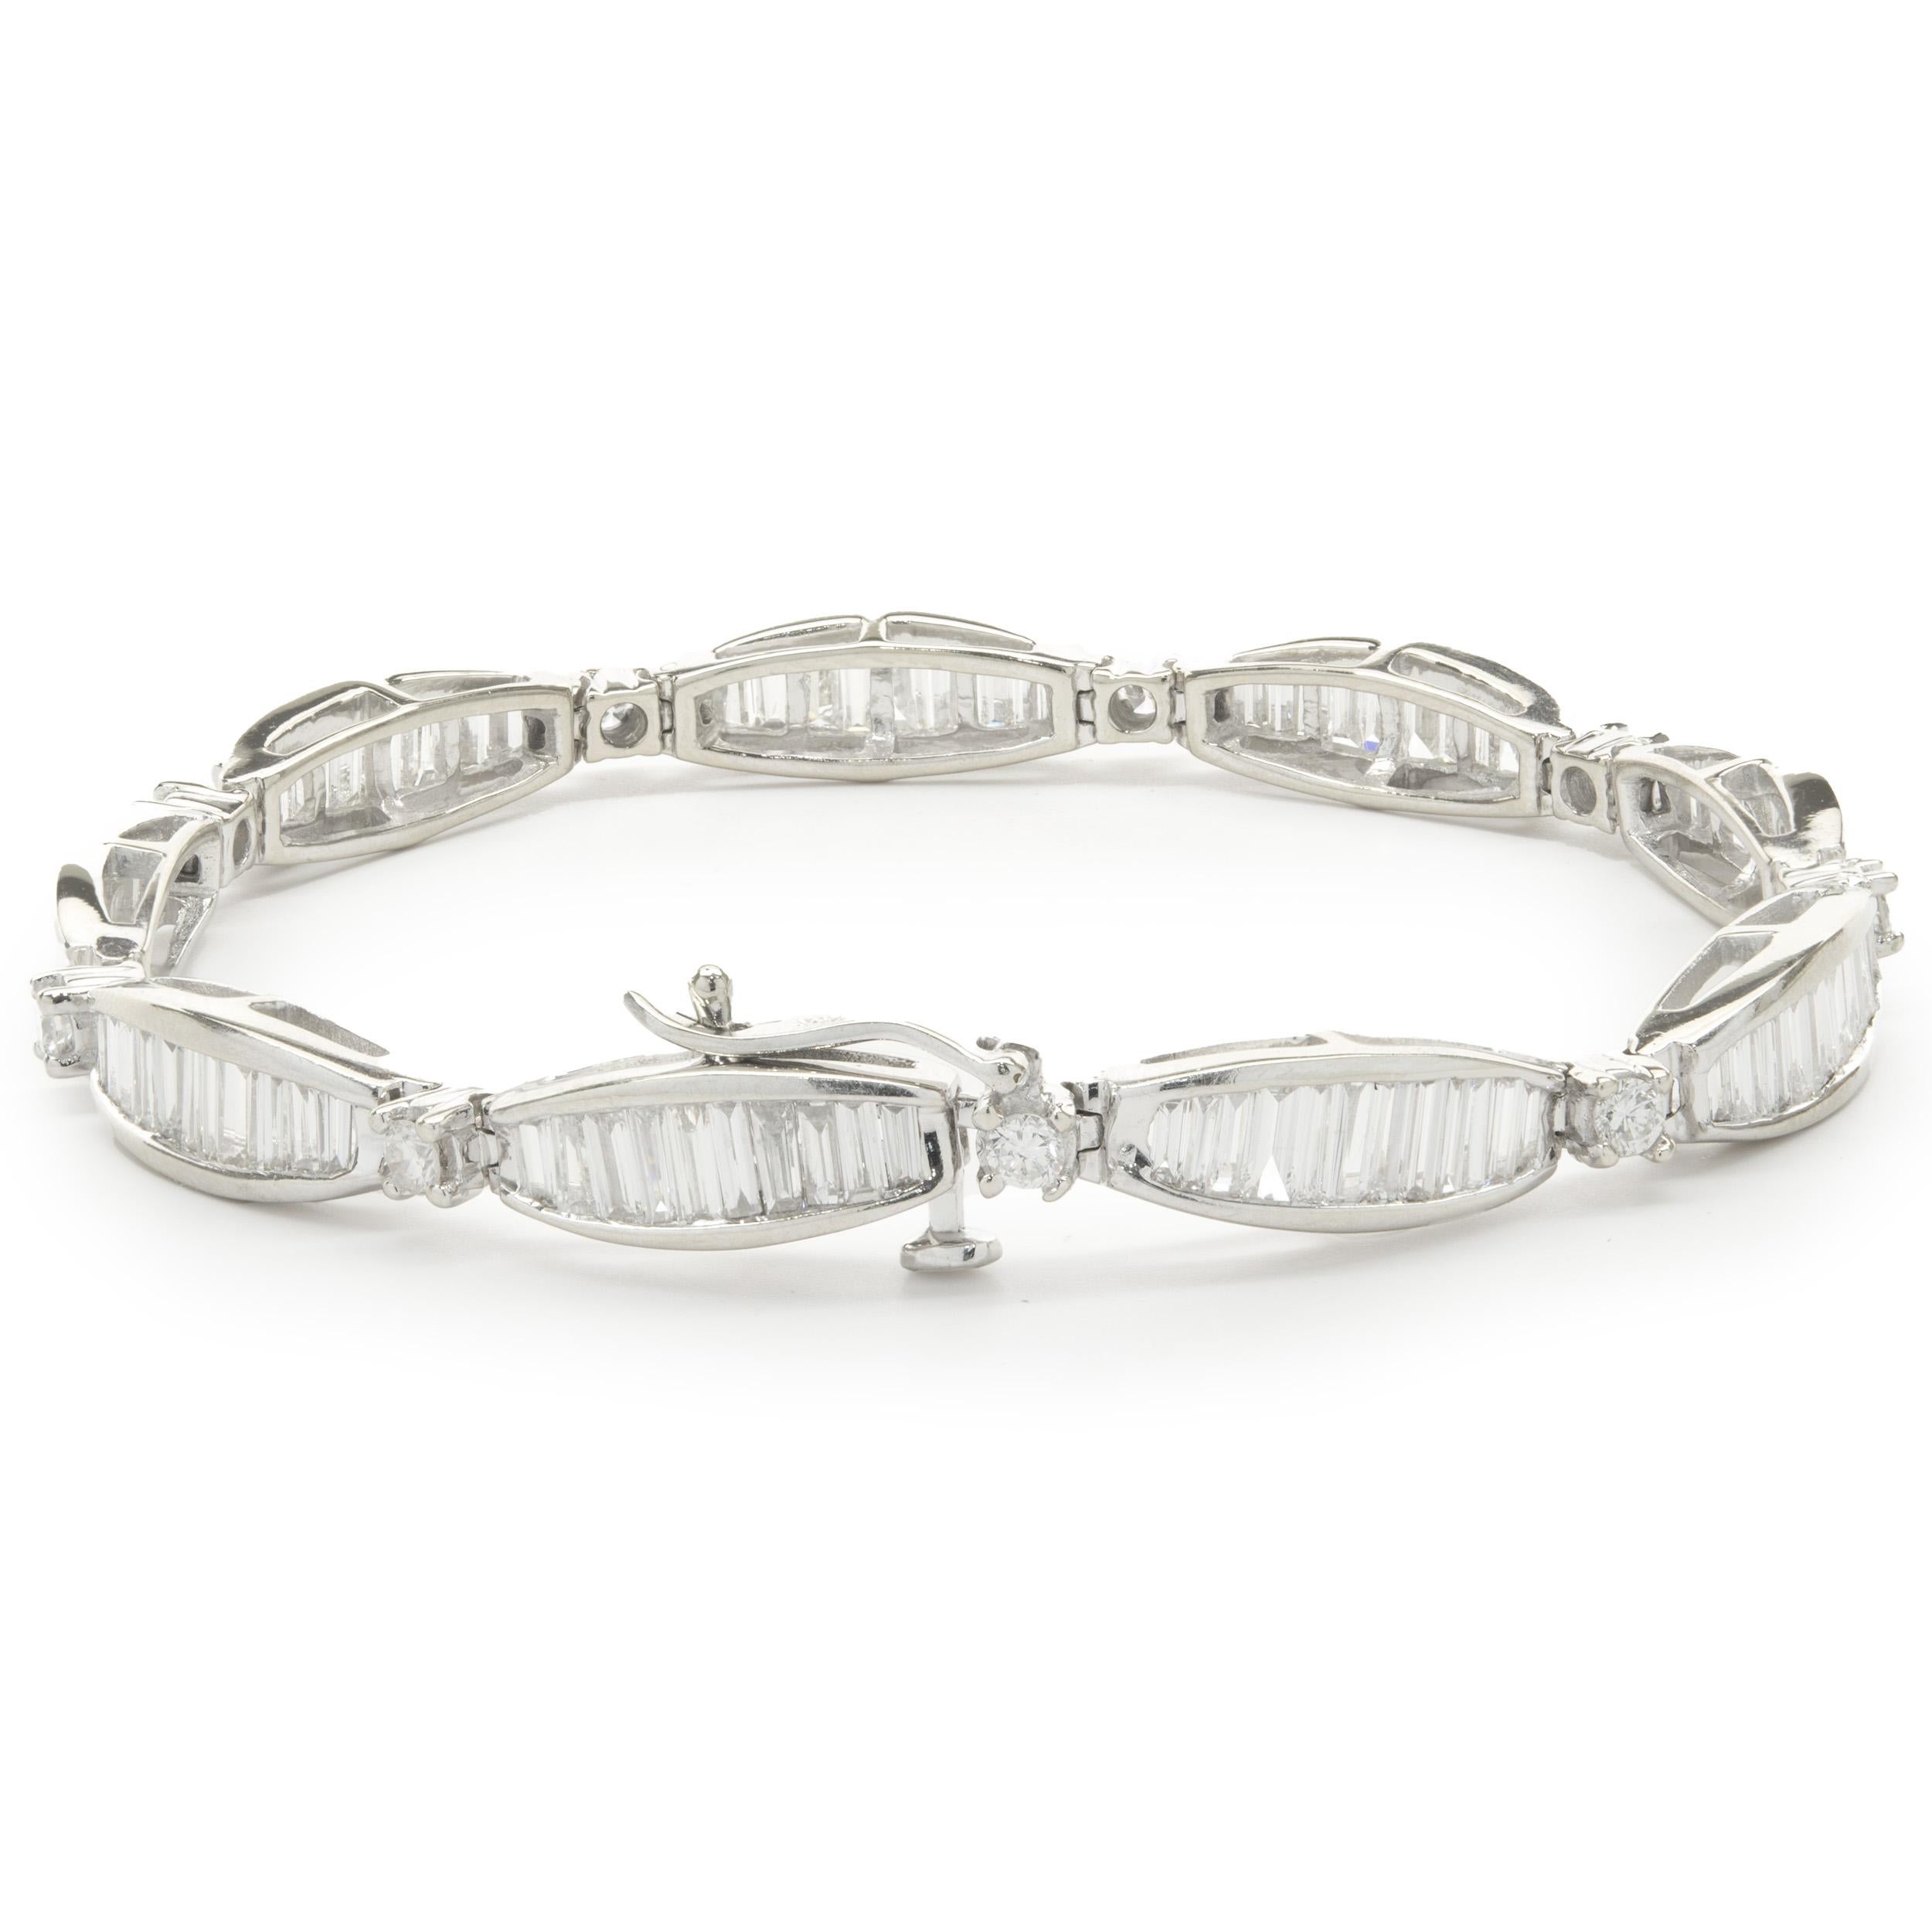 Designer: custom design
Material: 14K white gold
Diamond: 99 baguette cut = 8.50cttw
Color: H / I
Clarity: SI1
Diamond: 9 round brilliant cut = 0.50cttw
Color: H
Clarity: SI1
Dimensions: bracelet measures 7-inches in length
Weight: 17.50 grams